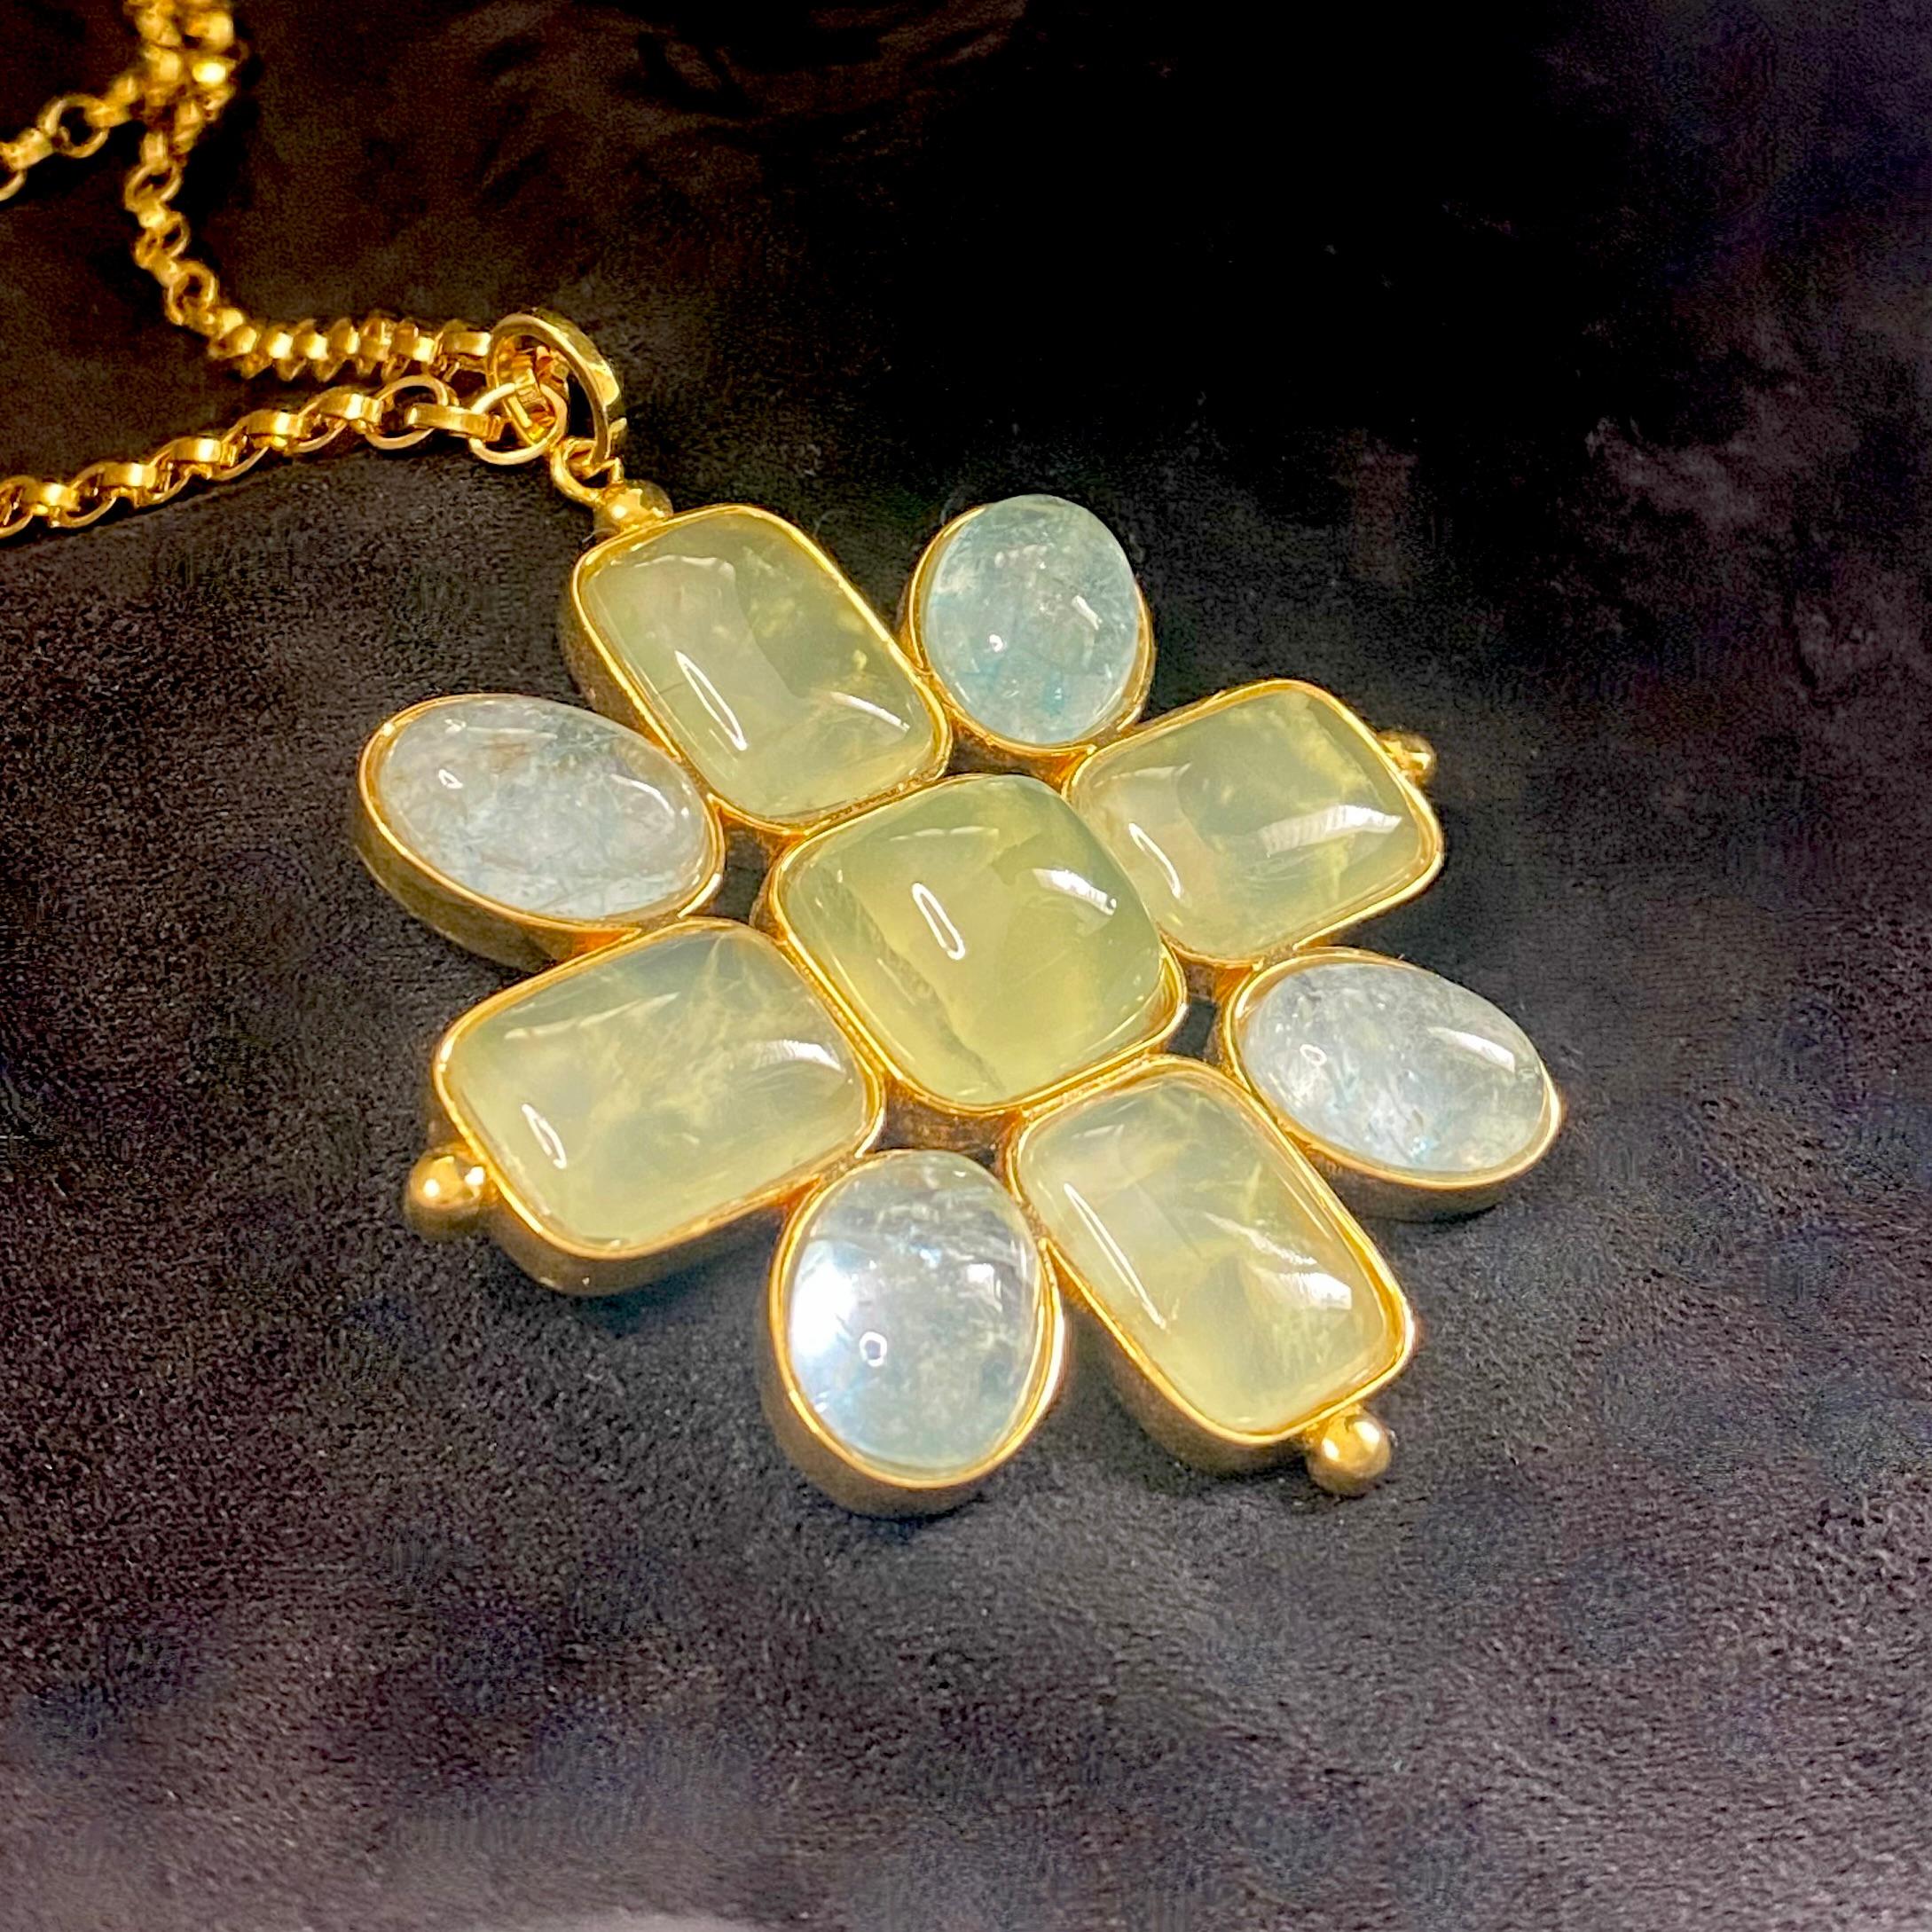 Set with nine beautiful Prehnite & Aquamarine cabochon gemstones, the ‘Ode’ pendant is an extremely stylish and versatile pendant which looks fabulous worn casually or on more formal occasions.

The pendant is sold with a long ‘oval-link’ chain & a